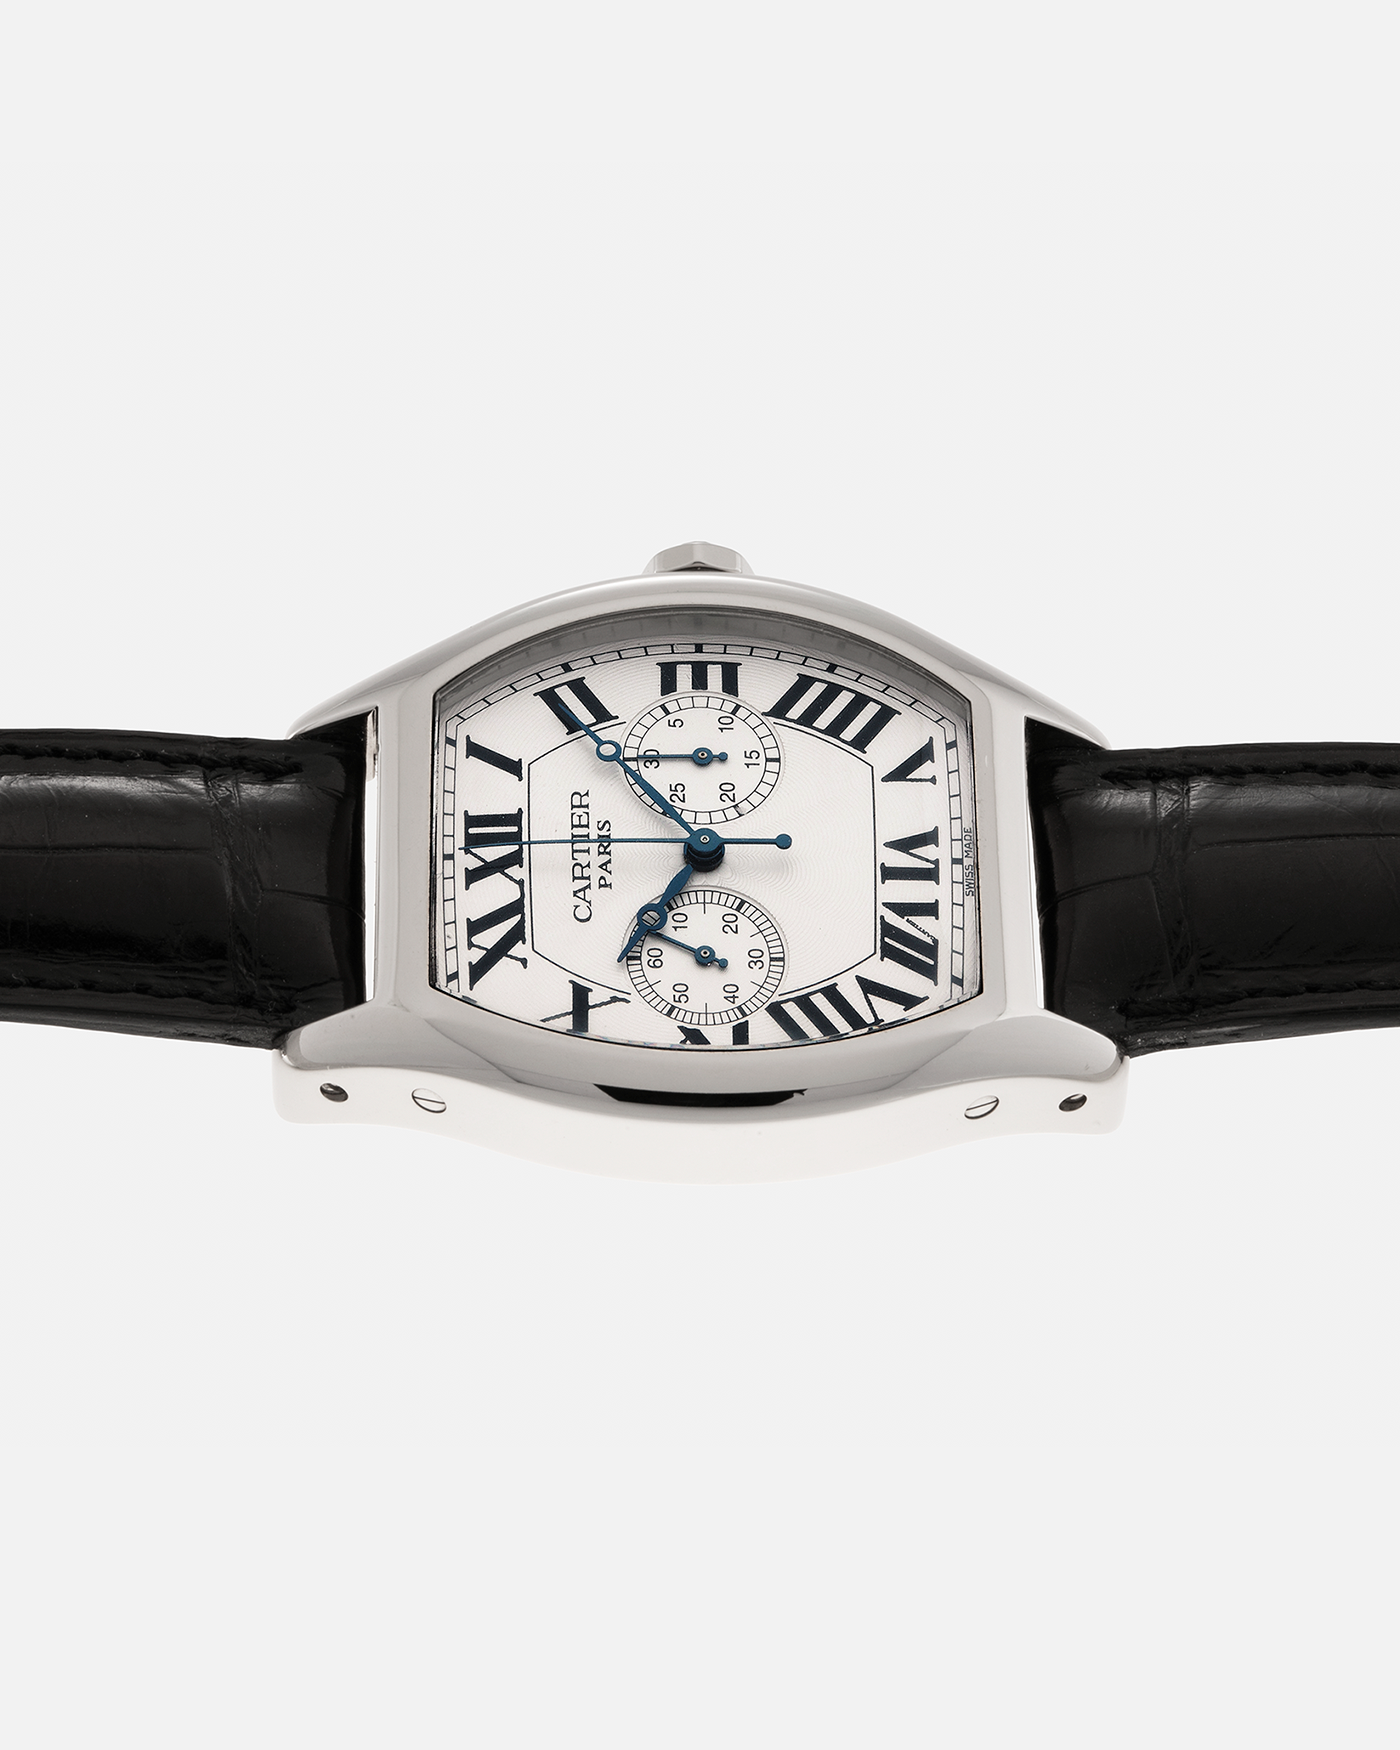 Brand: Cartier Year: 2000s Model: CPCP Collection Prive Tortue Monopoussoir XL Reference: 2762 Material: 18-carat White Gold Movement: THA Cal. 045MC, Manual-Winding Case Dimensions: 37mm x 39 mm Lug Width: 20mm Strap: Jean Rosseau Black Alligator Leather Strap with Signed 18-carat White Gold Deployant Clasp